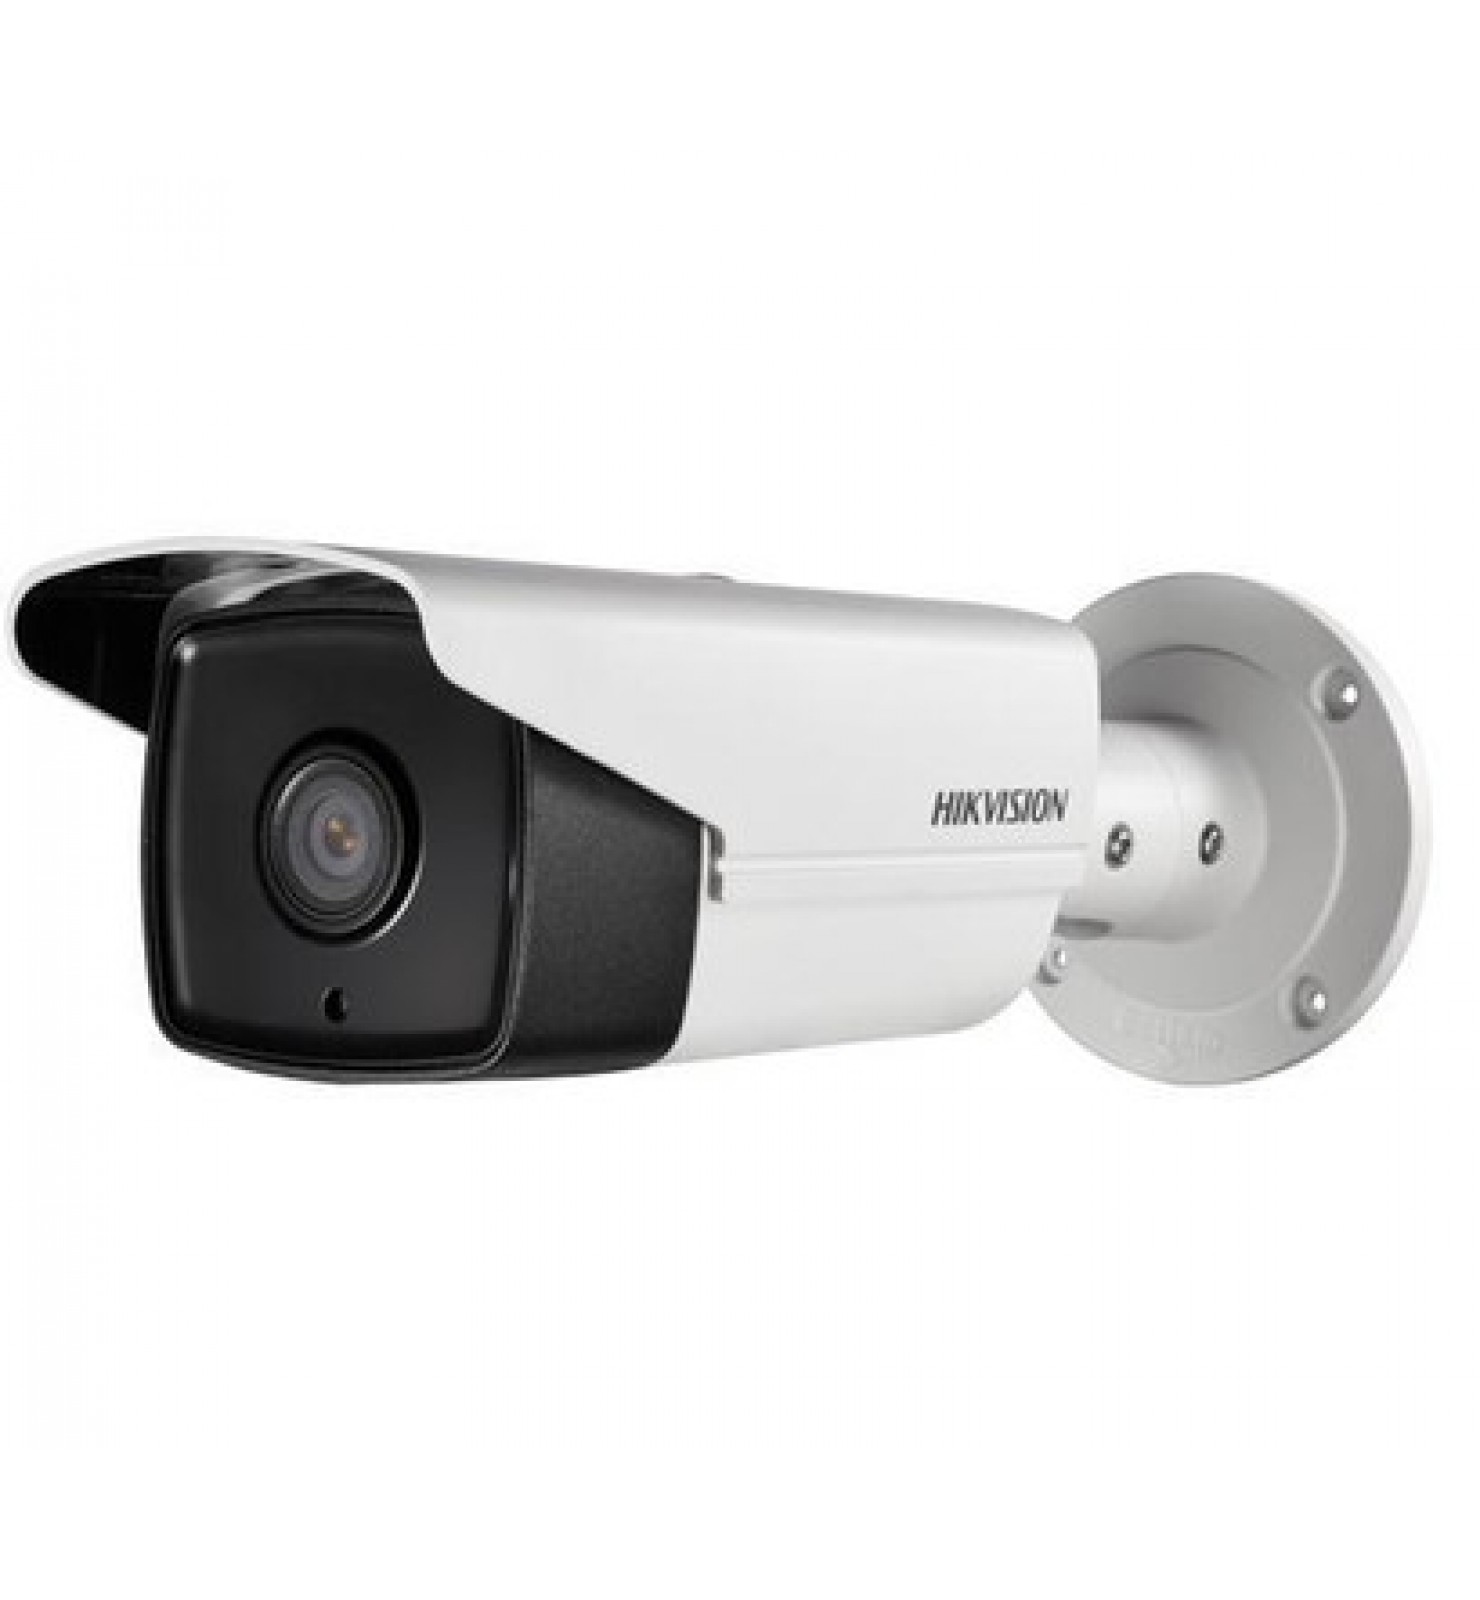 Камера Hikvision DS-2CD2T42WD-I3